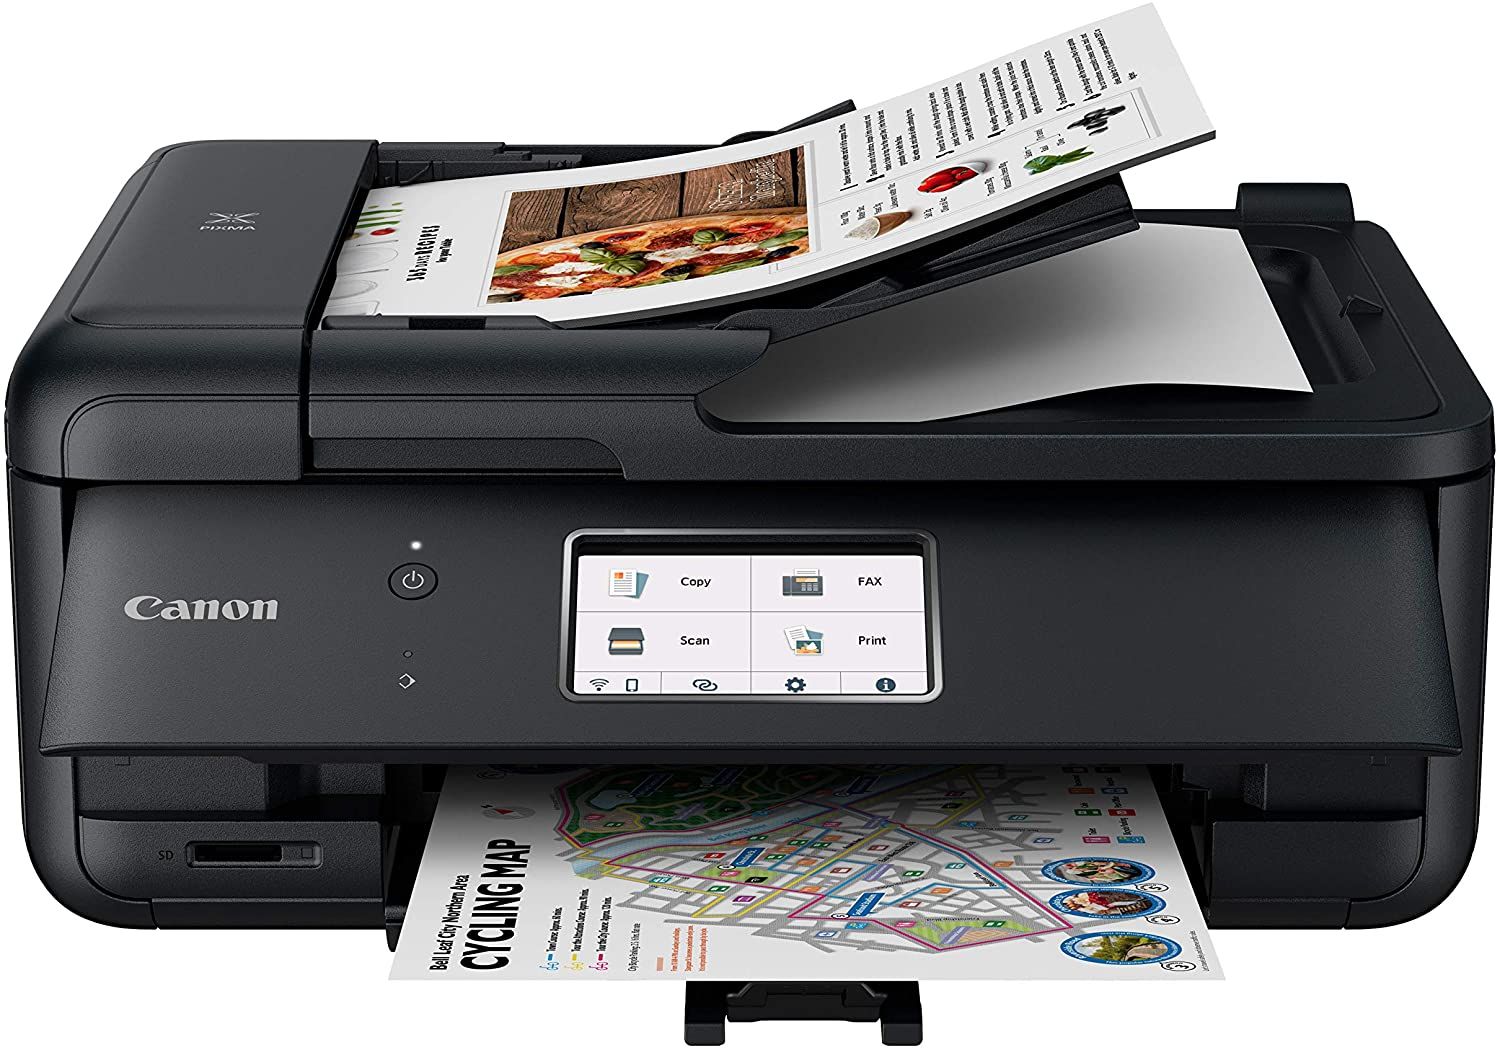 The 10 Best home AllinOne Printers of 2021 ReviewThis